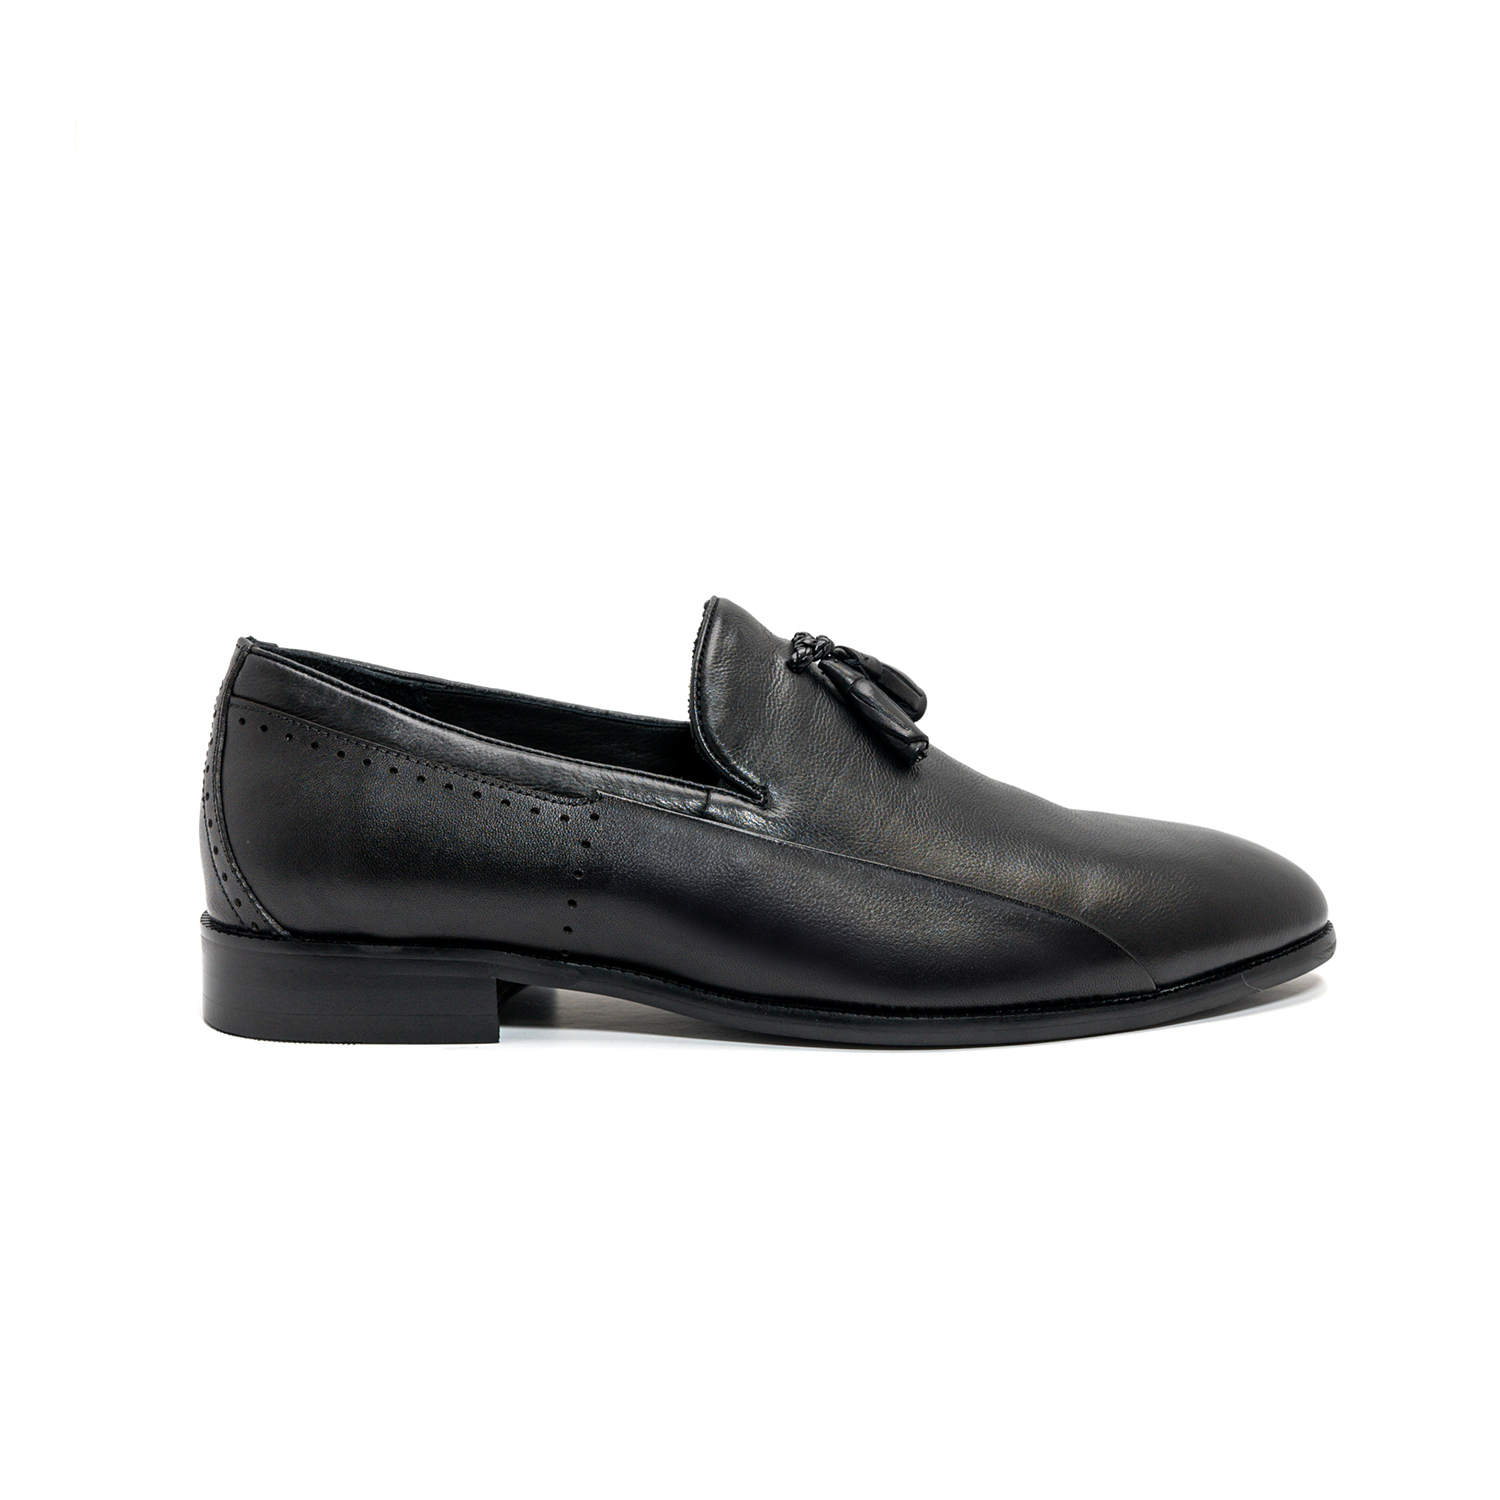 Most Comfortable Black Loafers with Tassel - Snover